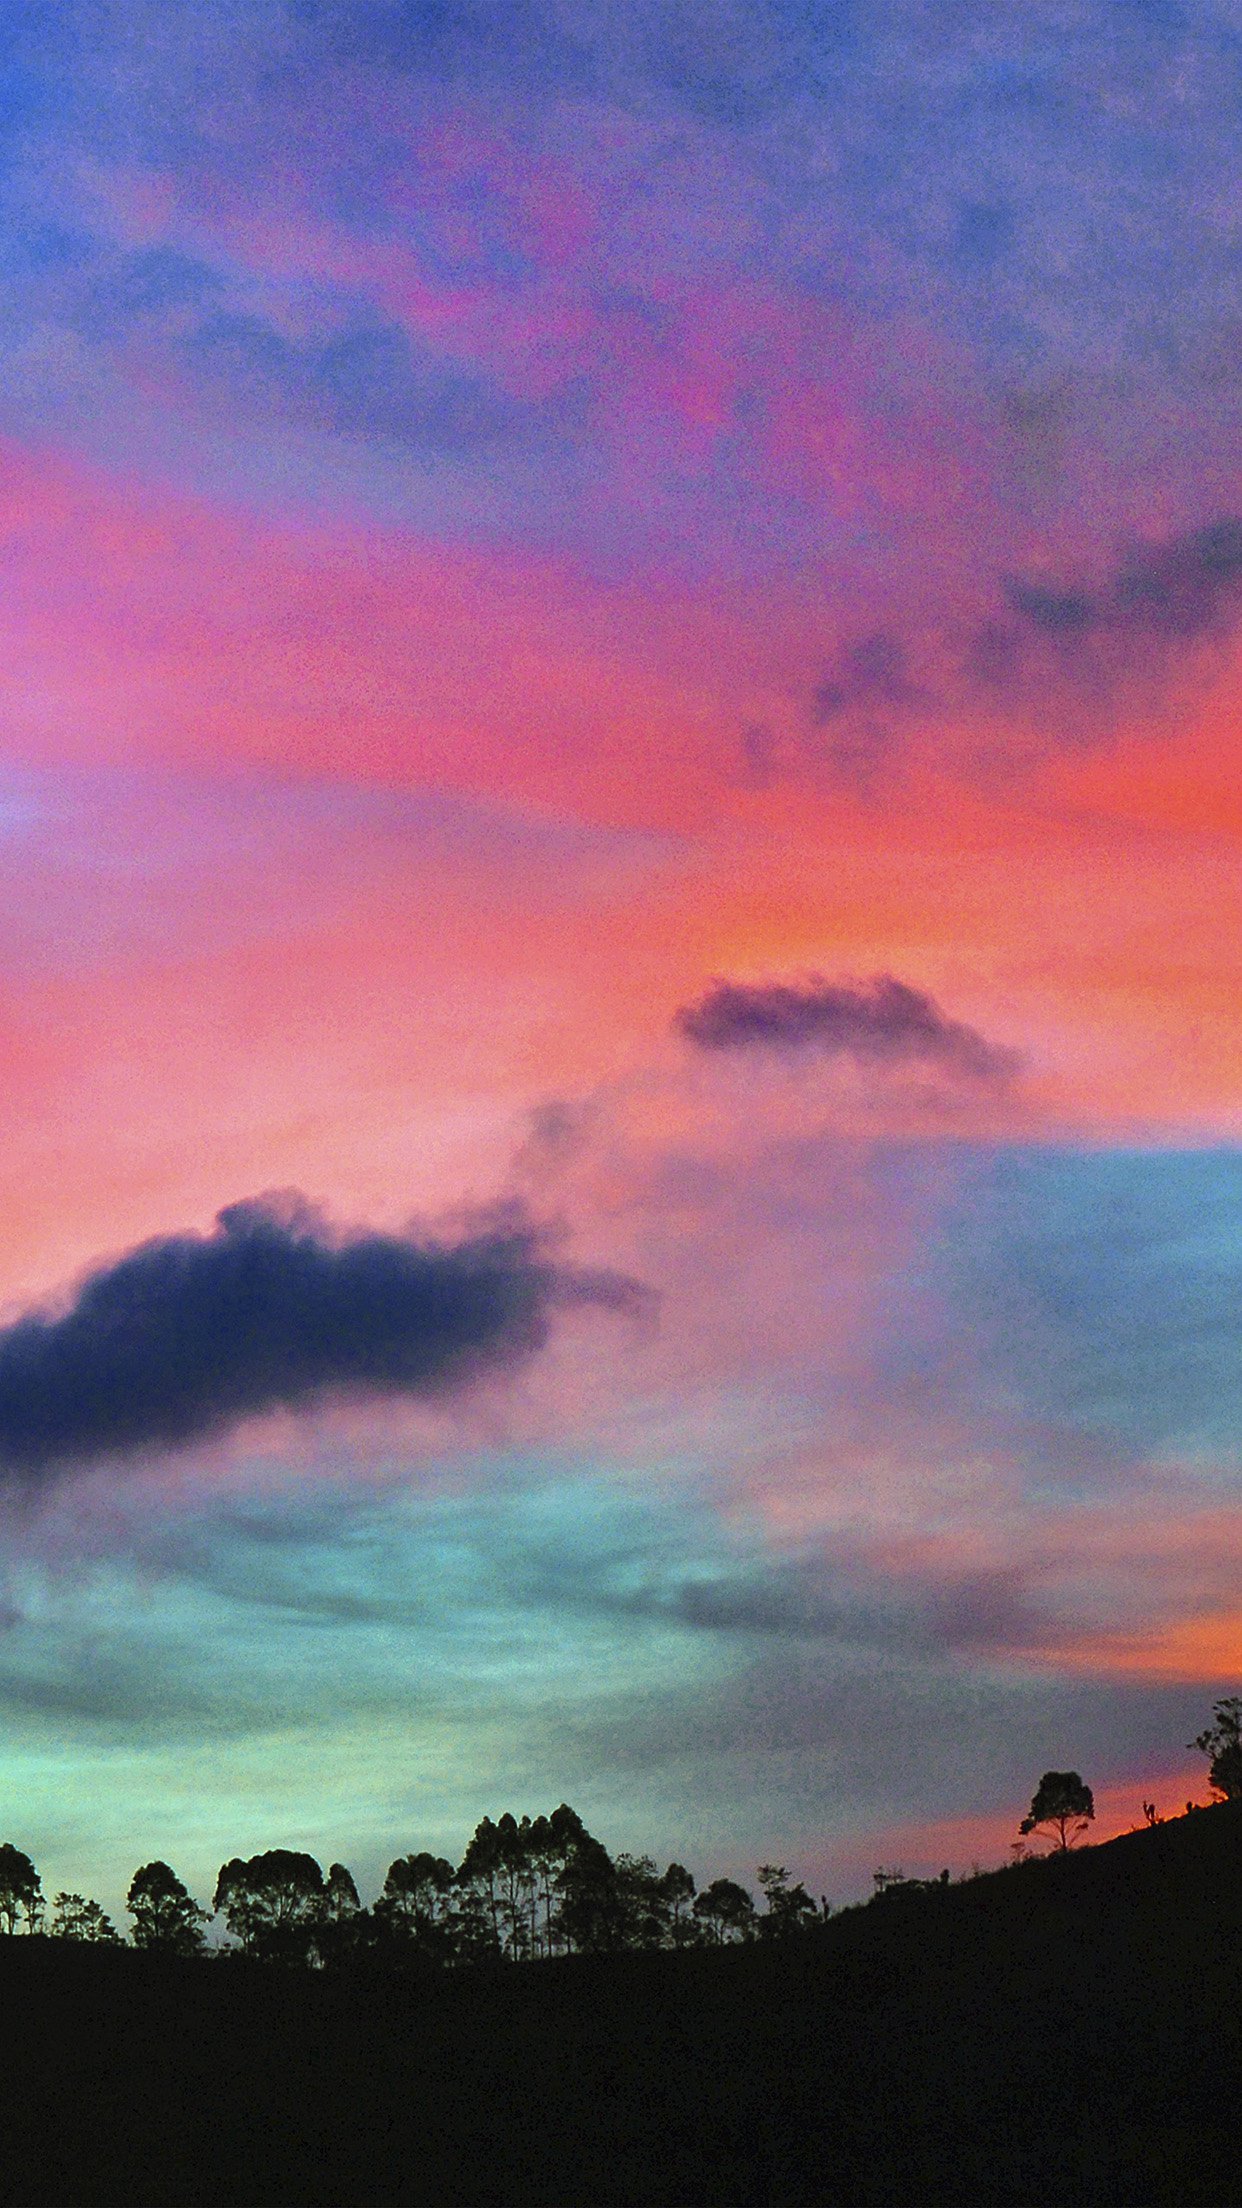 sky wallpaper for iphone,sky,afterglow,cloud,red sky at morning,sunrise